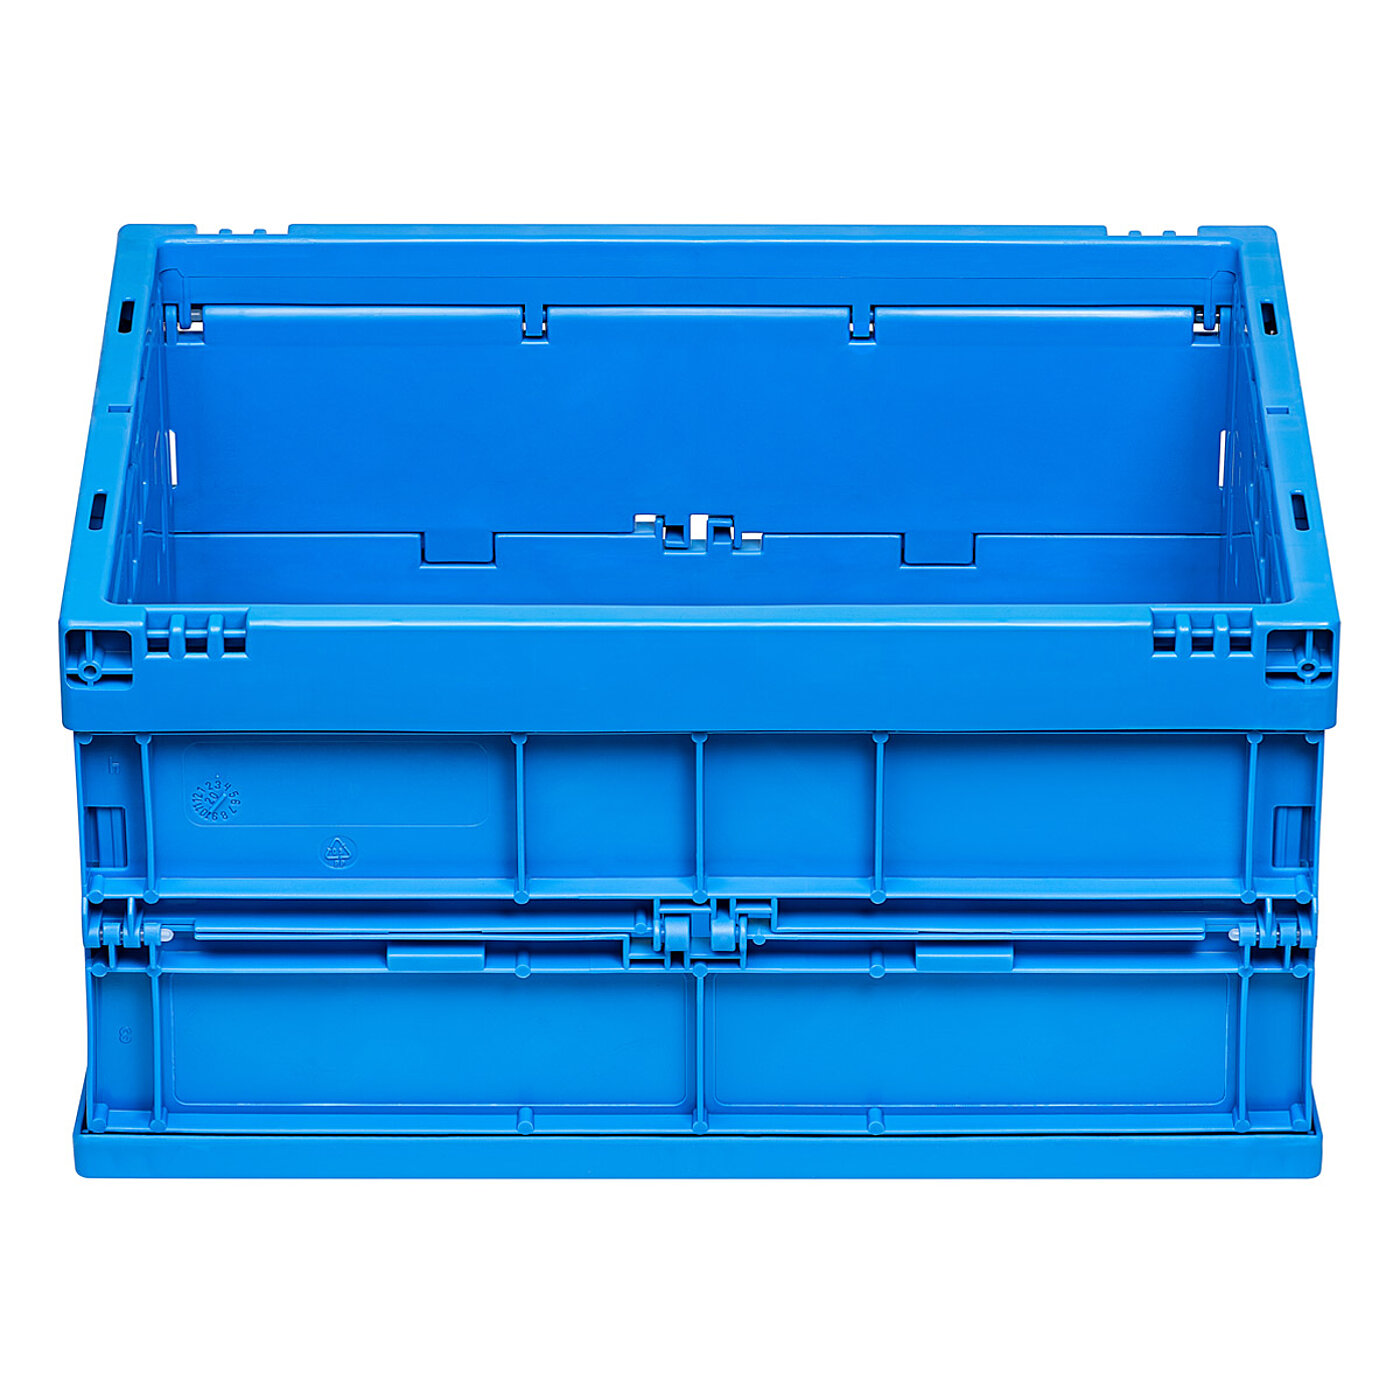 a blue foldable box made of plastics, in long side view, isolated on white background